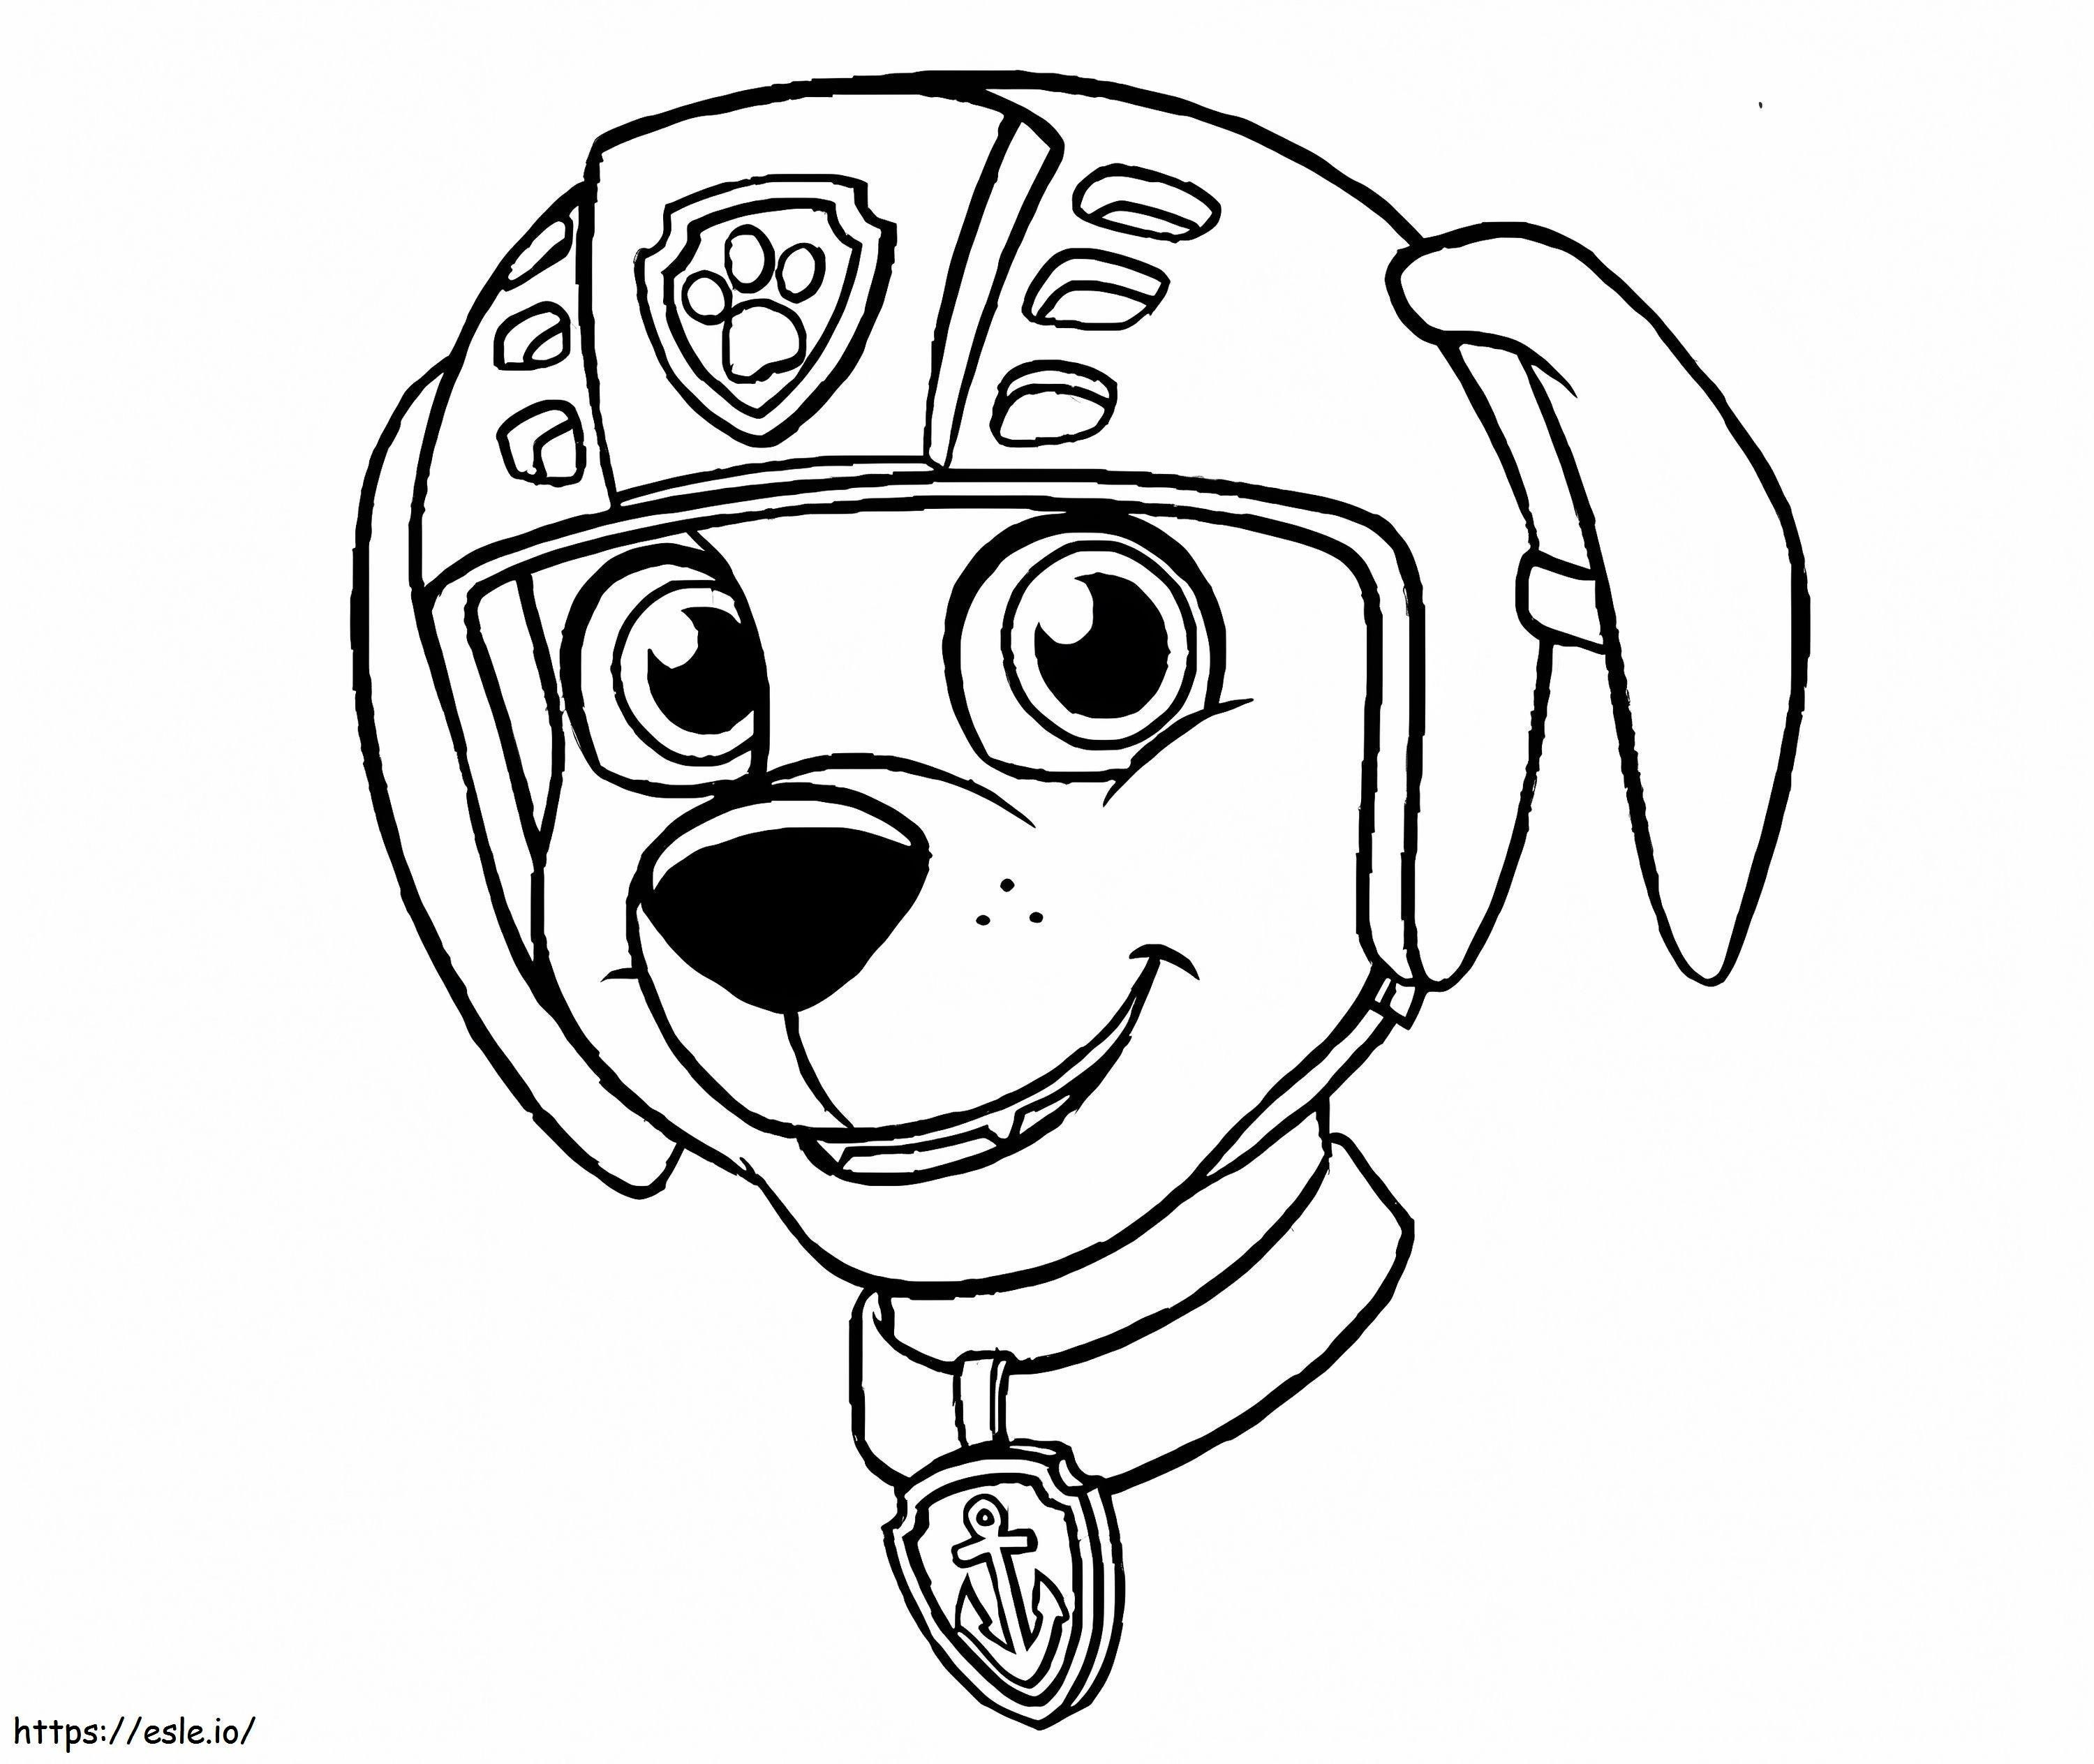 Zuma Face coloring page